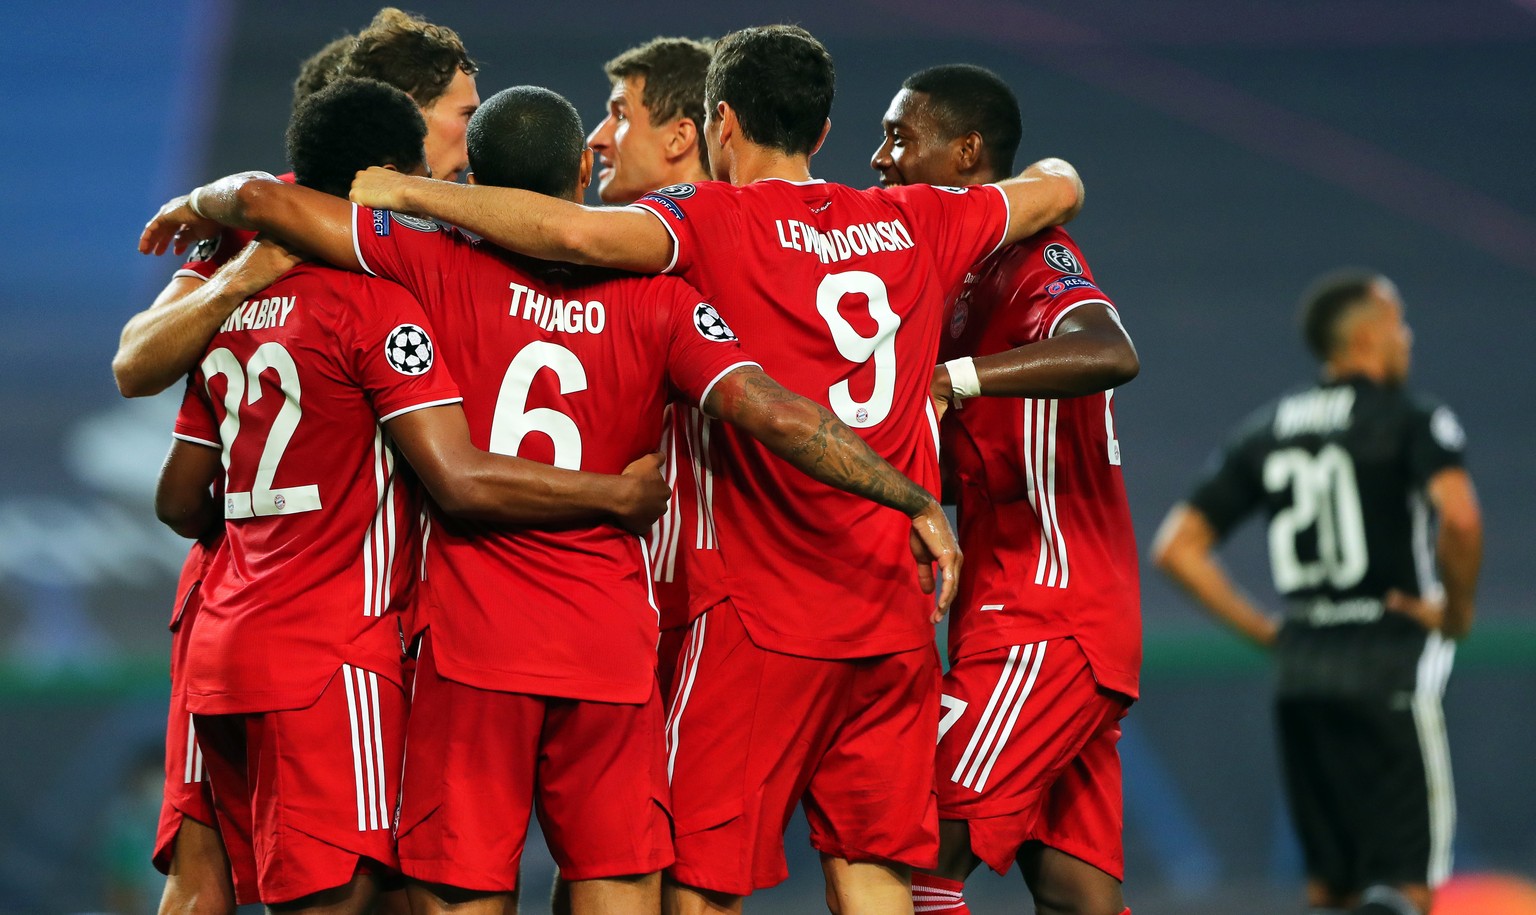 epa08613348 Players of Bayern Munich celebrate their 2-0 lead during the UEFA Champions League semi final soccer match between Olympique Lyon and Bayern Munich in Lisbon, Portugal, 19 August 2020. EPA ...